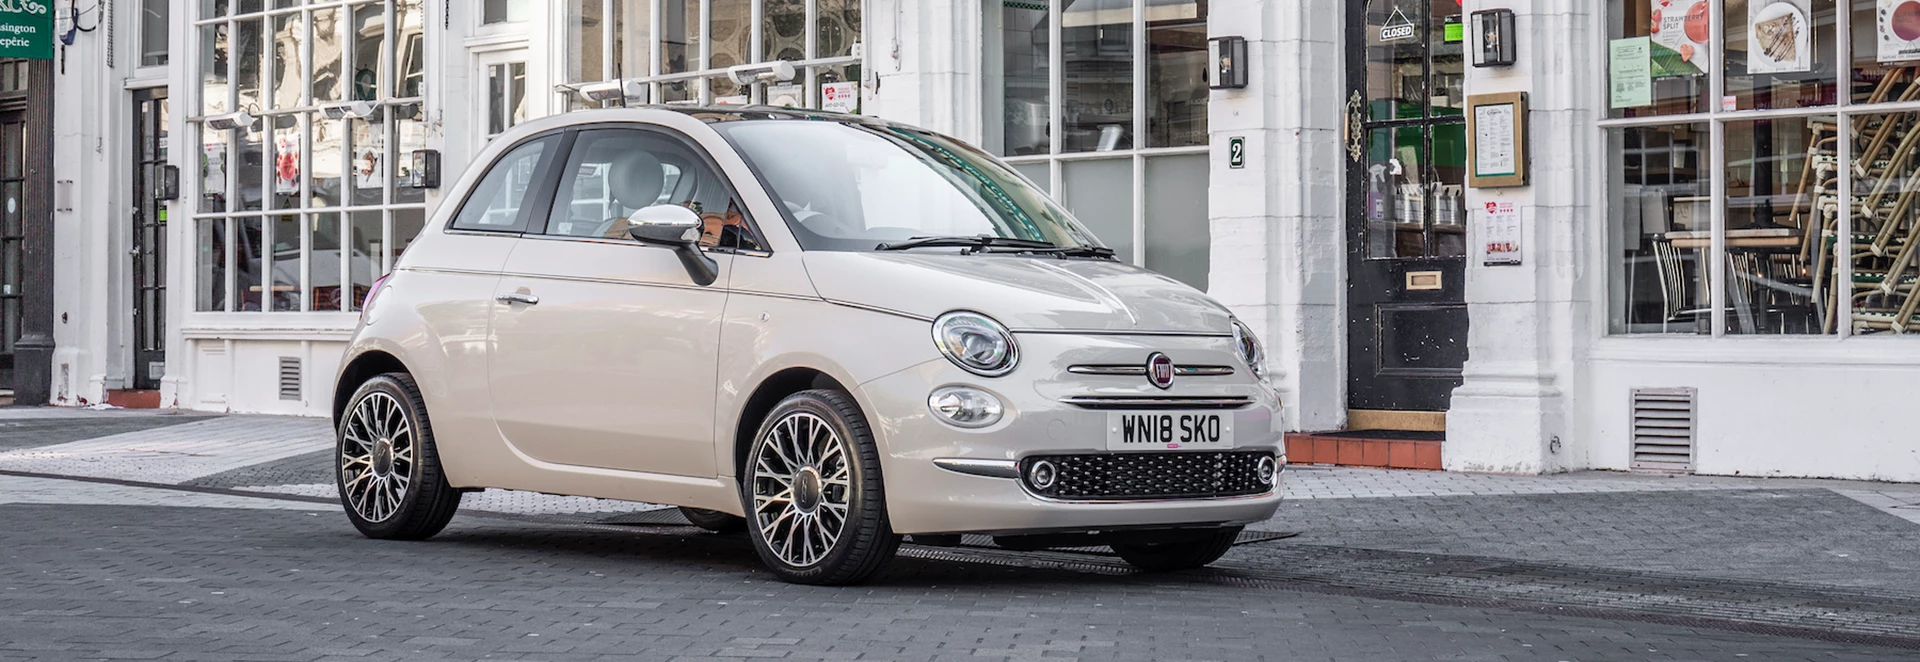 Buyer’s guide to the Fiat 500 